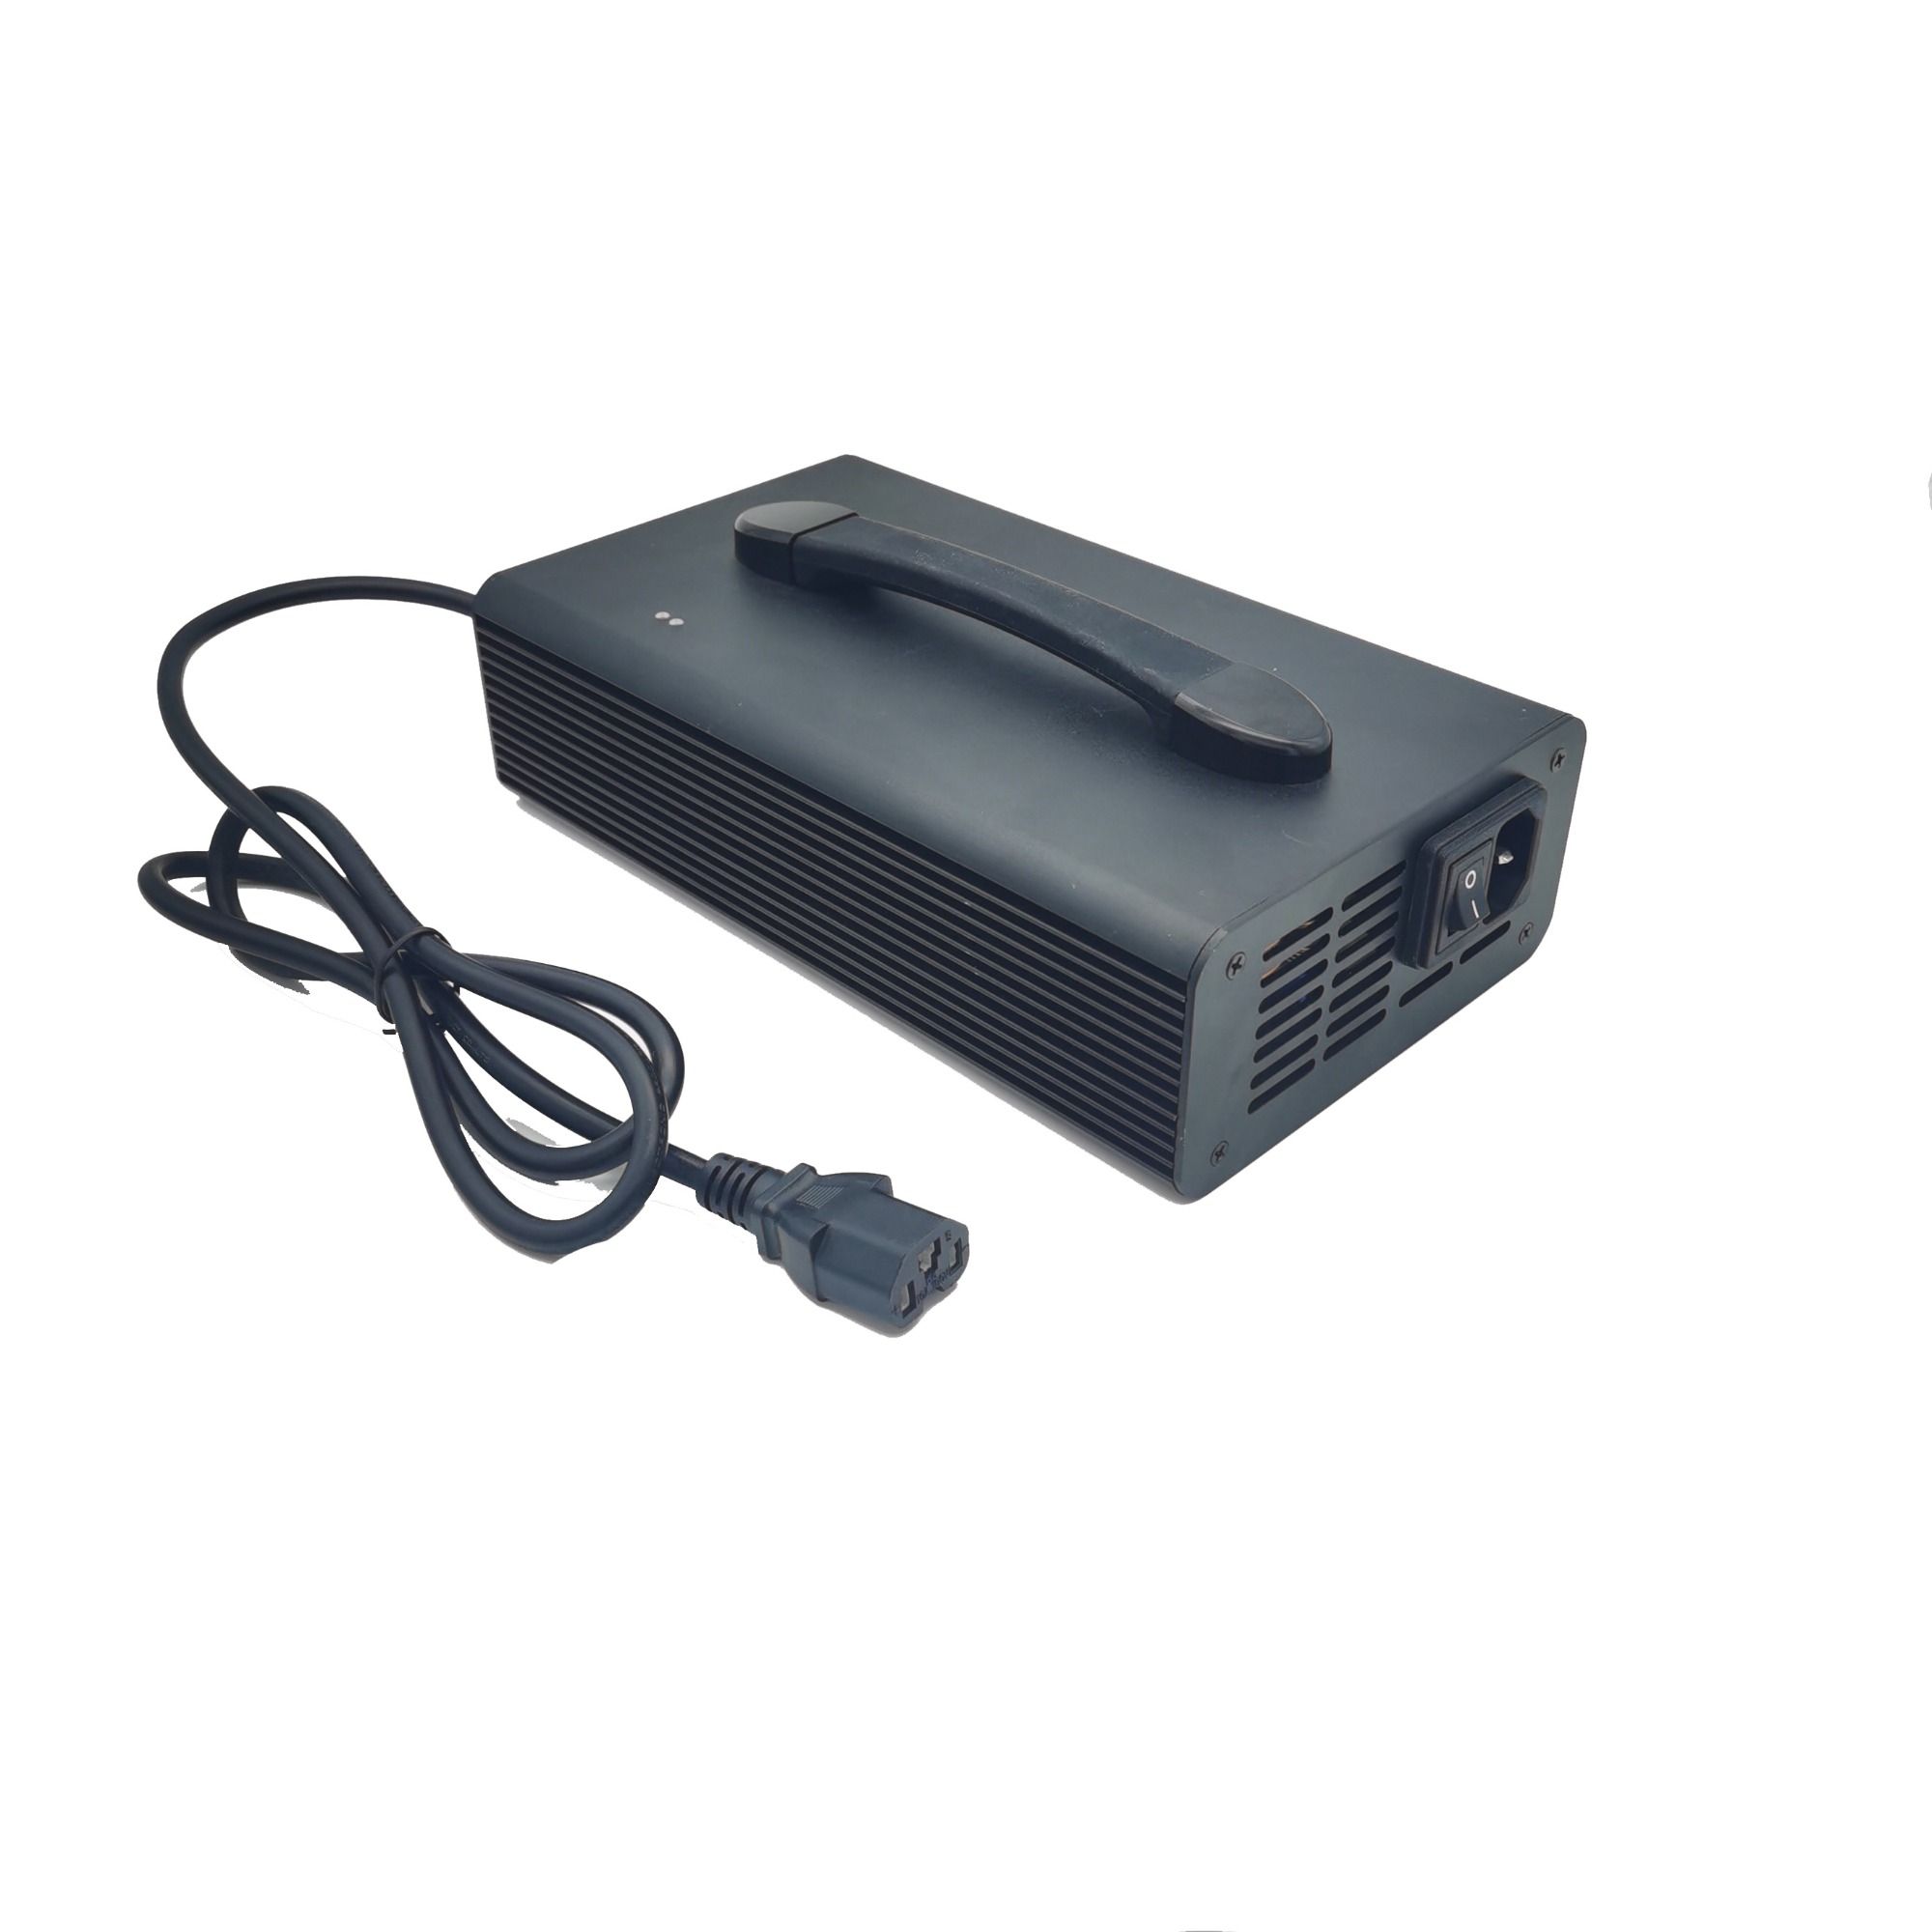 Smart design 29.4V 20A Lithium battery charger For 7S Li-ion Battery charging